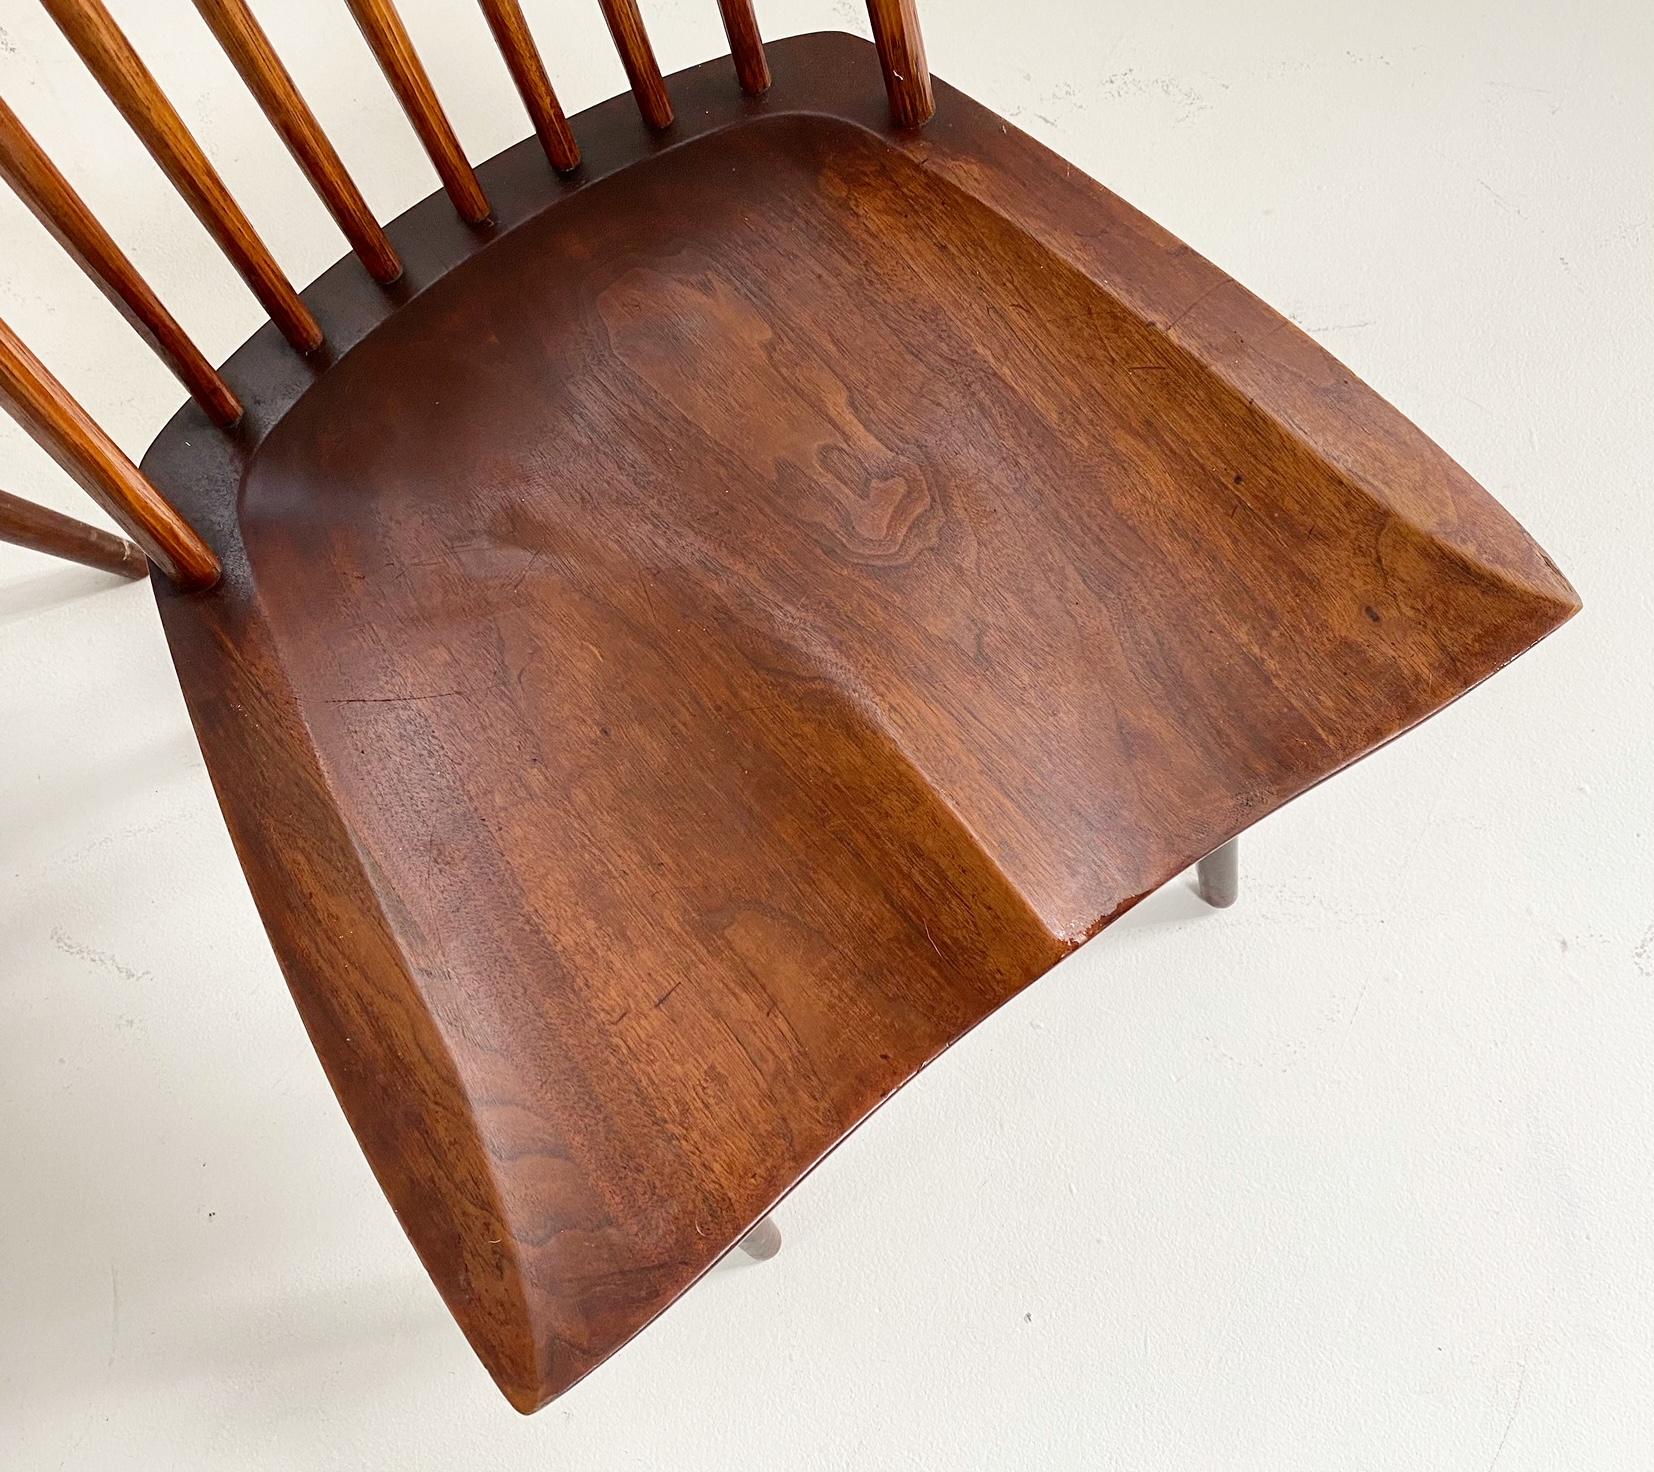 The new chair is a must-have for Nakashima lovers. Based on the design of a Windsor chair, the wood craftsmanship is supreme. 

These chairs are sold with a digital copy of the original order card. The chairs have been in one family since they